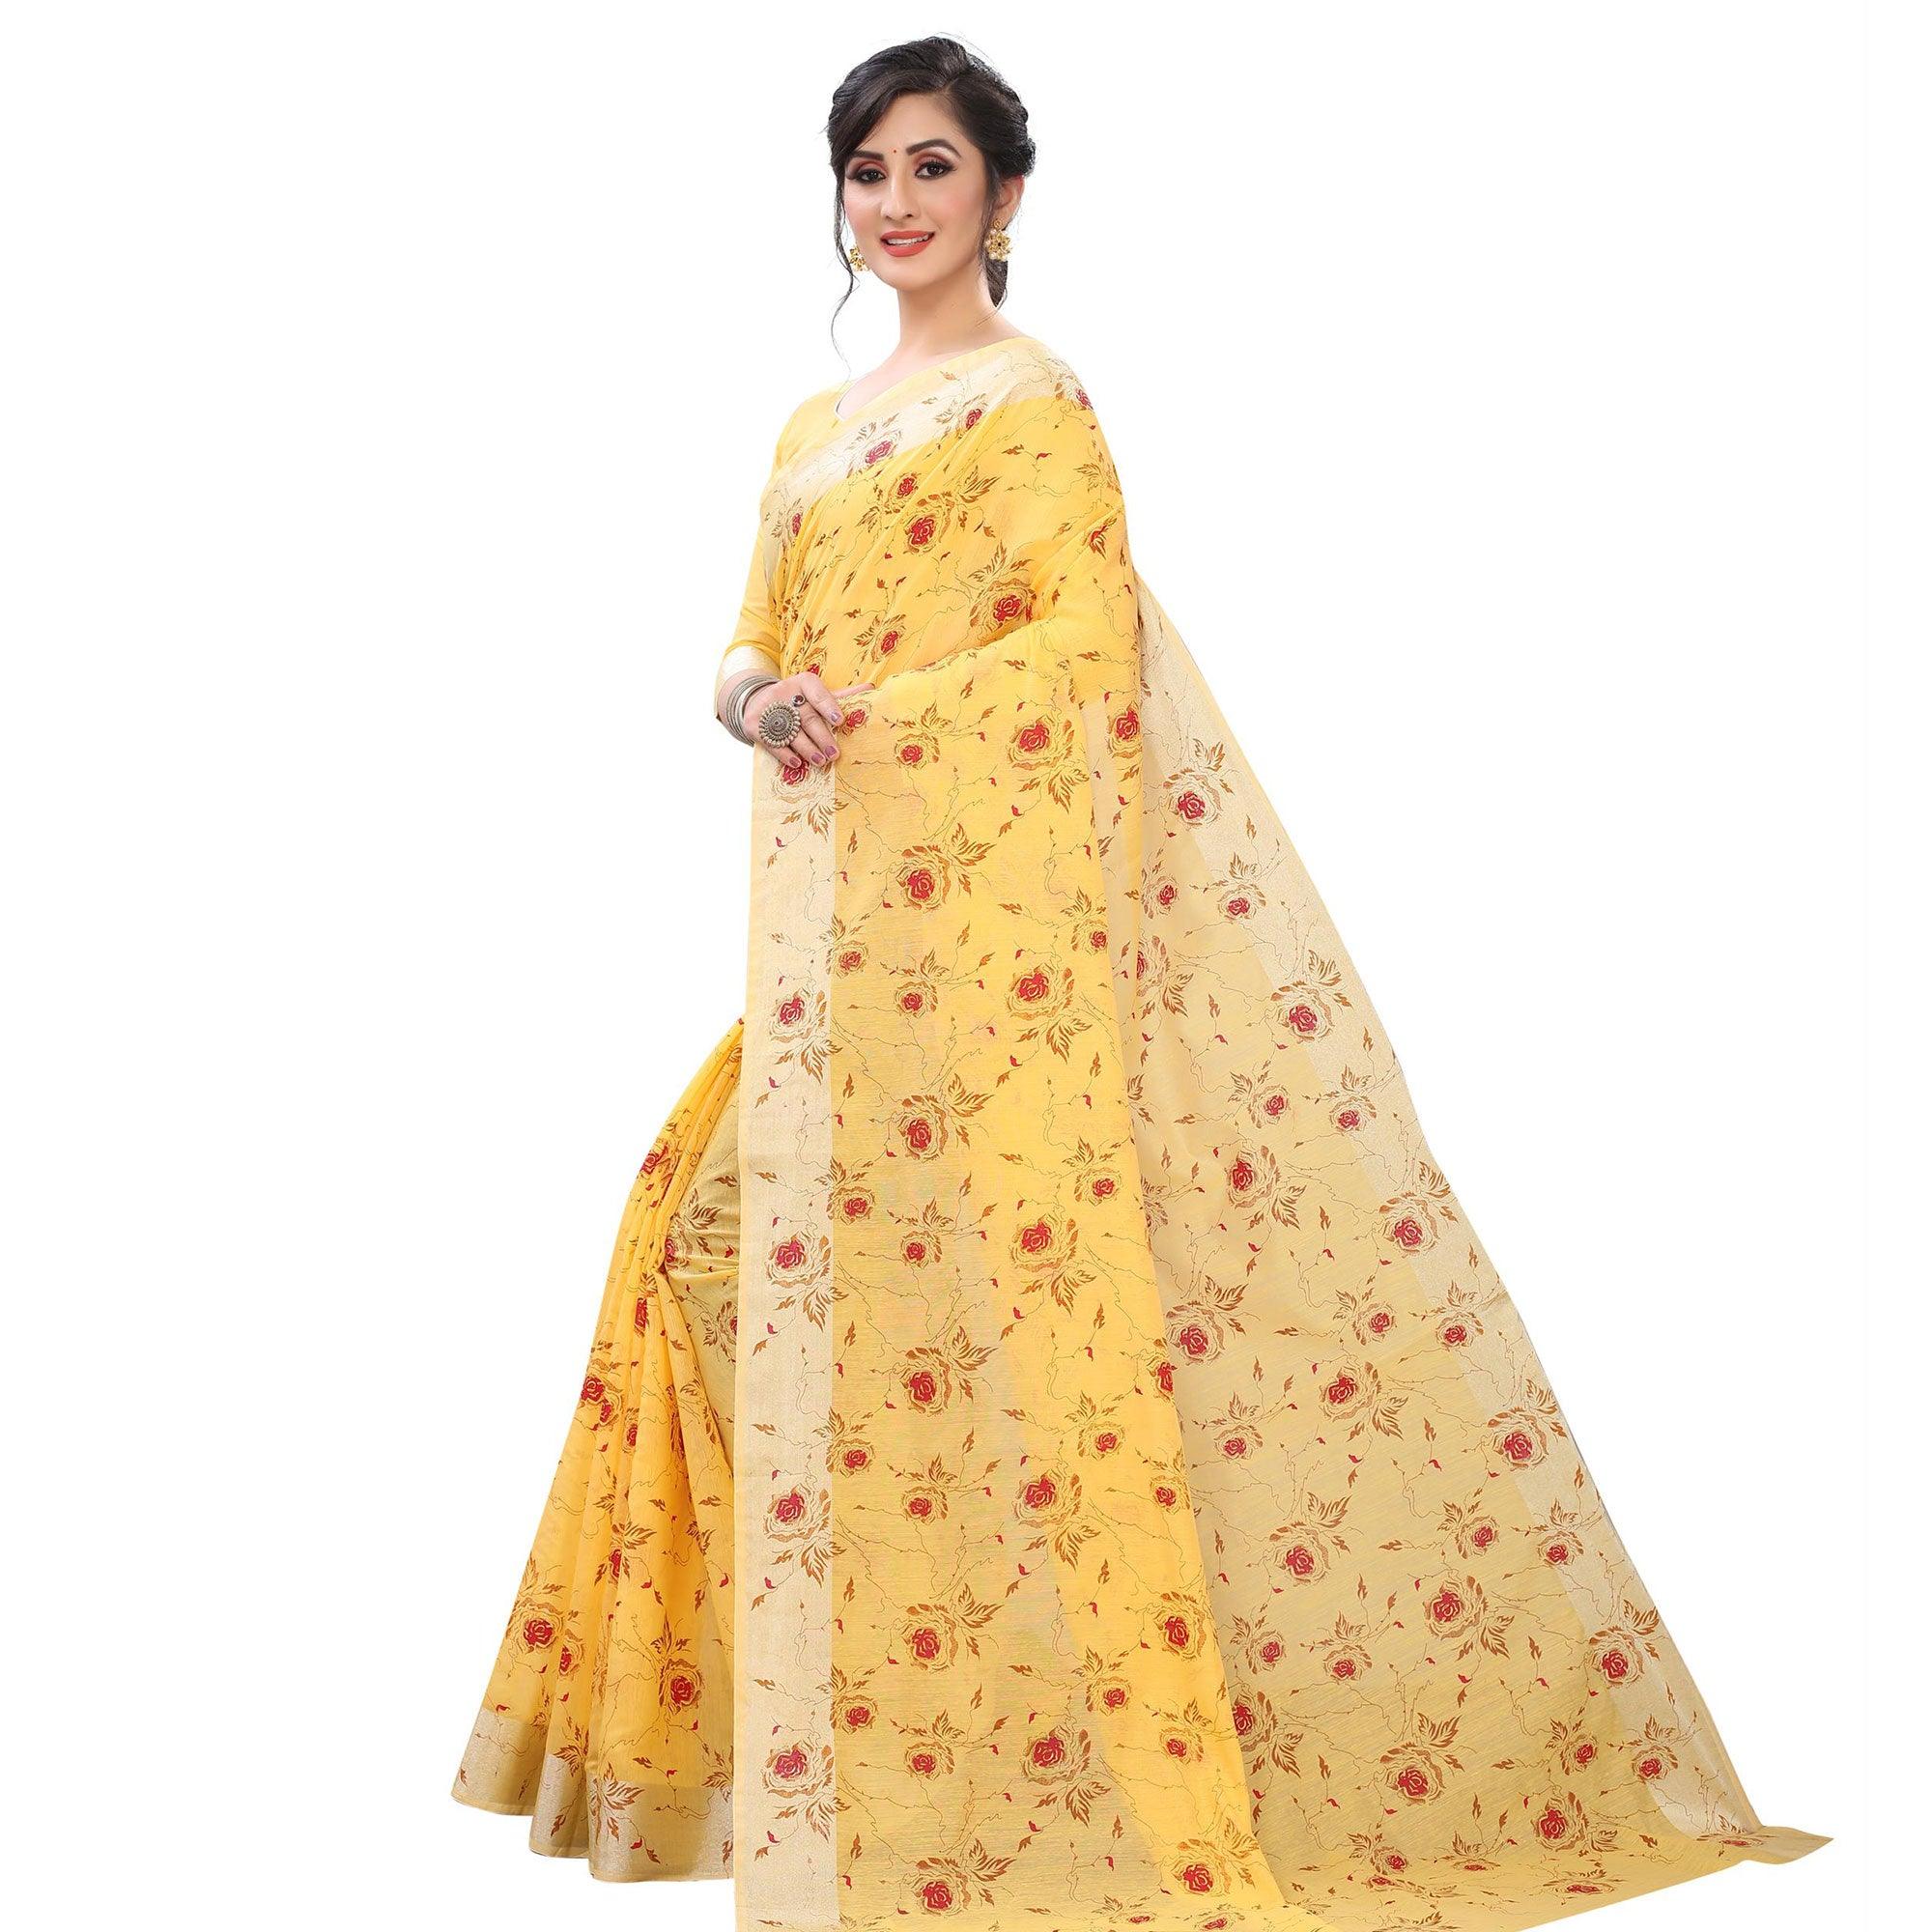 Glowing Yellow Colored Casual Wear Printed Cotton Linen Saree - Peachmode